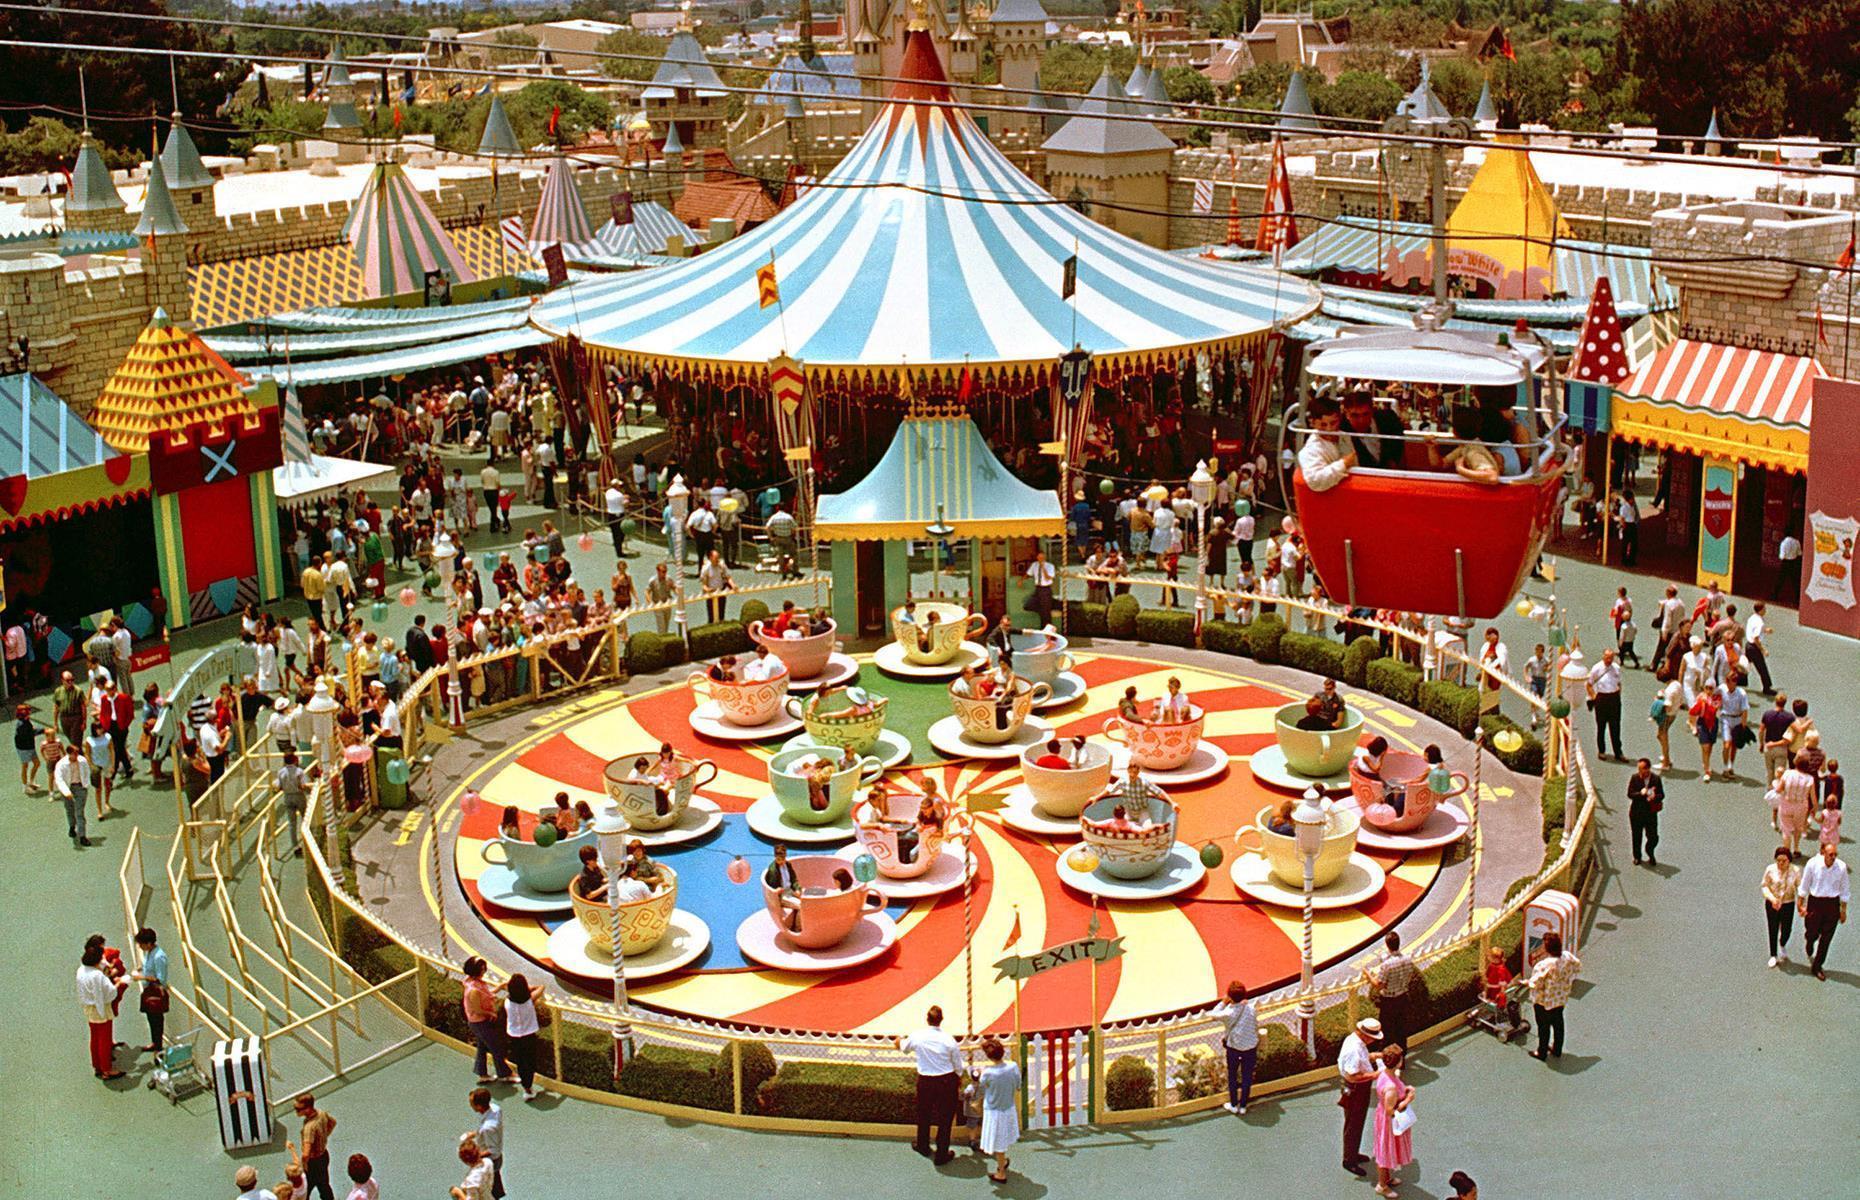 <p>America's love affair with Disney continued into the 1960s and, of course, well beyond. This 1960s photograph shows tourists enjoying one of Fantasyland's whimsical attractions: the spinning teacups of the kaleidoscopic Mad Tea Party ride were inspired by <em>Alice in Wonderland</em>.</p>  <p><strong><a href="https://www.loveexploring.com/galleries/92839/stunning-historic-images-of-theme-parks-in-full-swing?page=1">Here are more historic images of theme parks in full swing</a></strong></p>